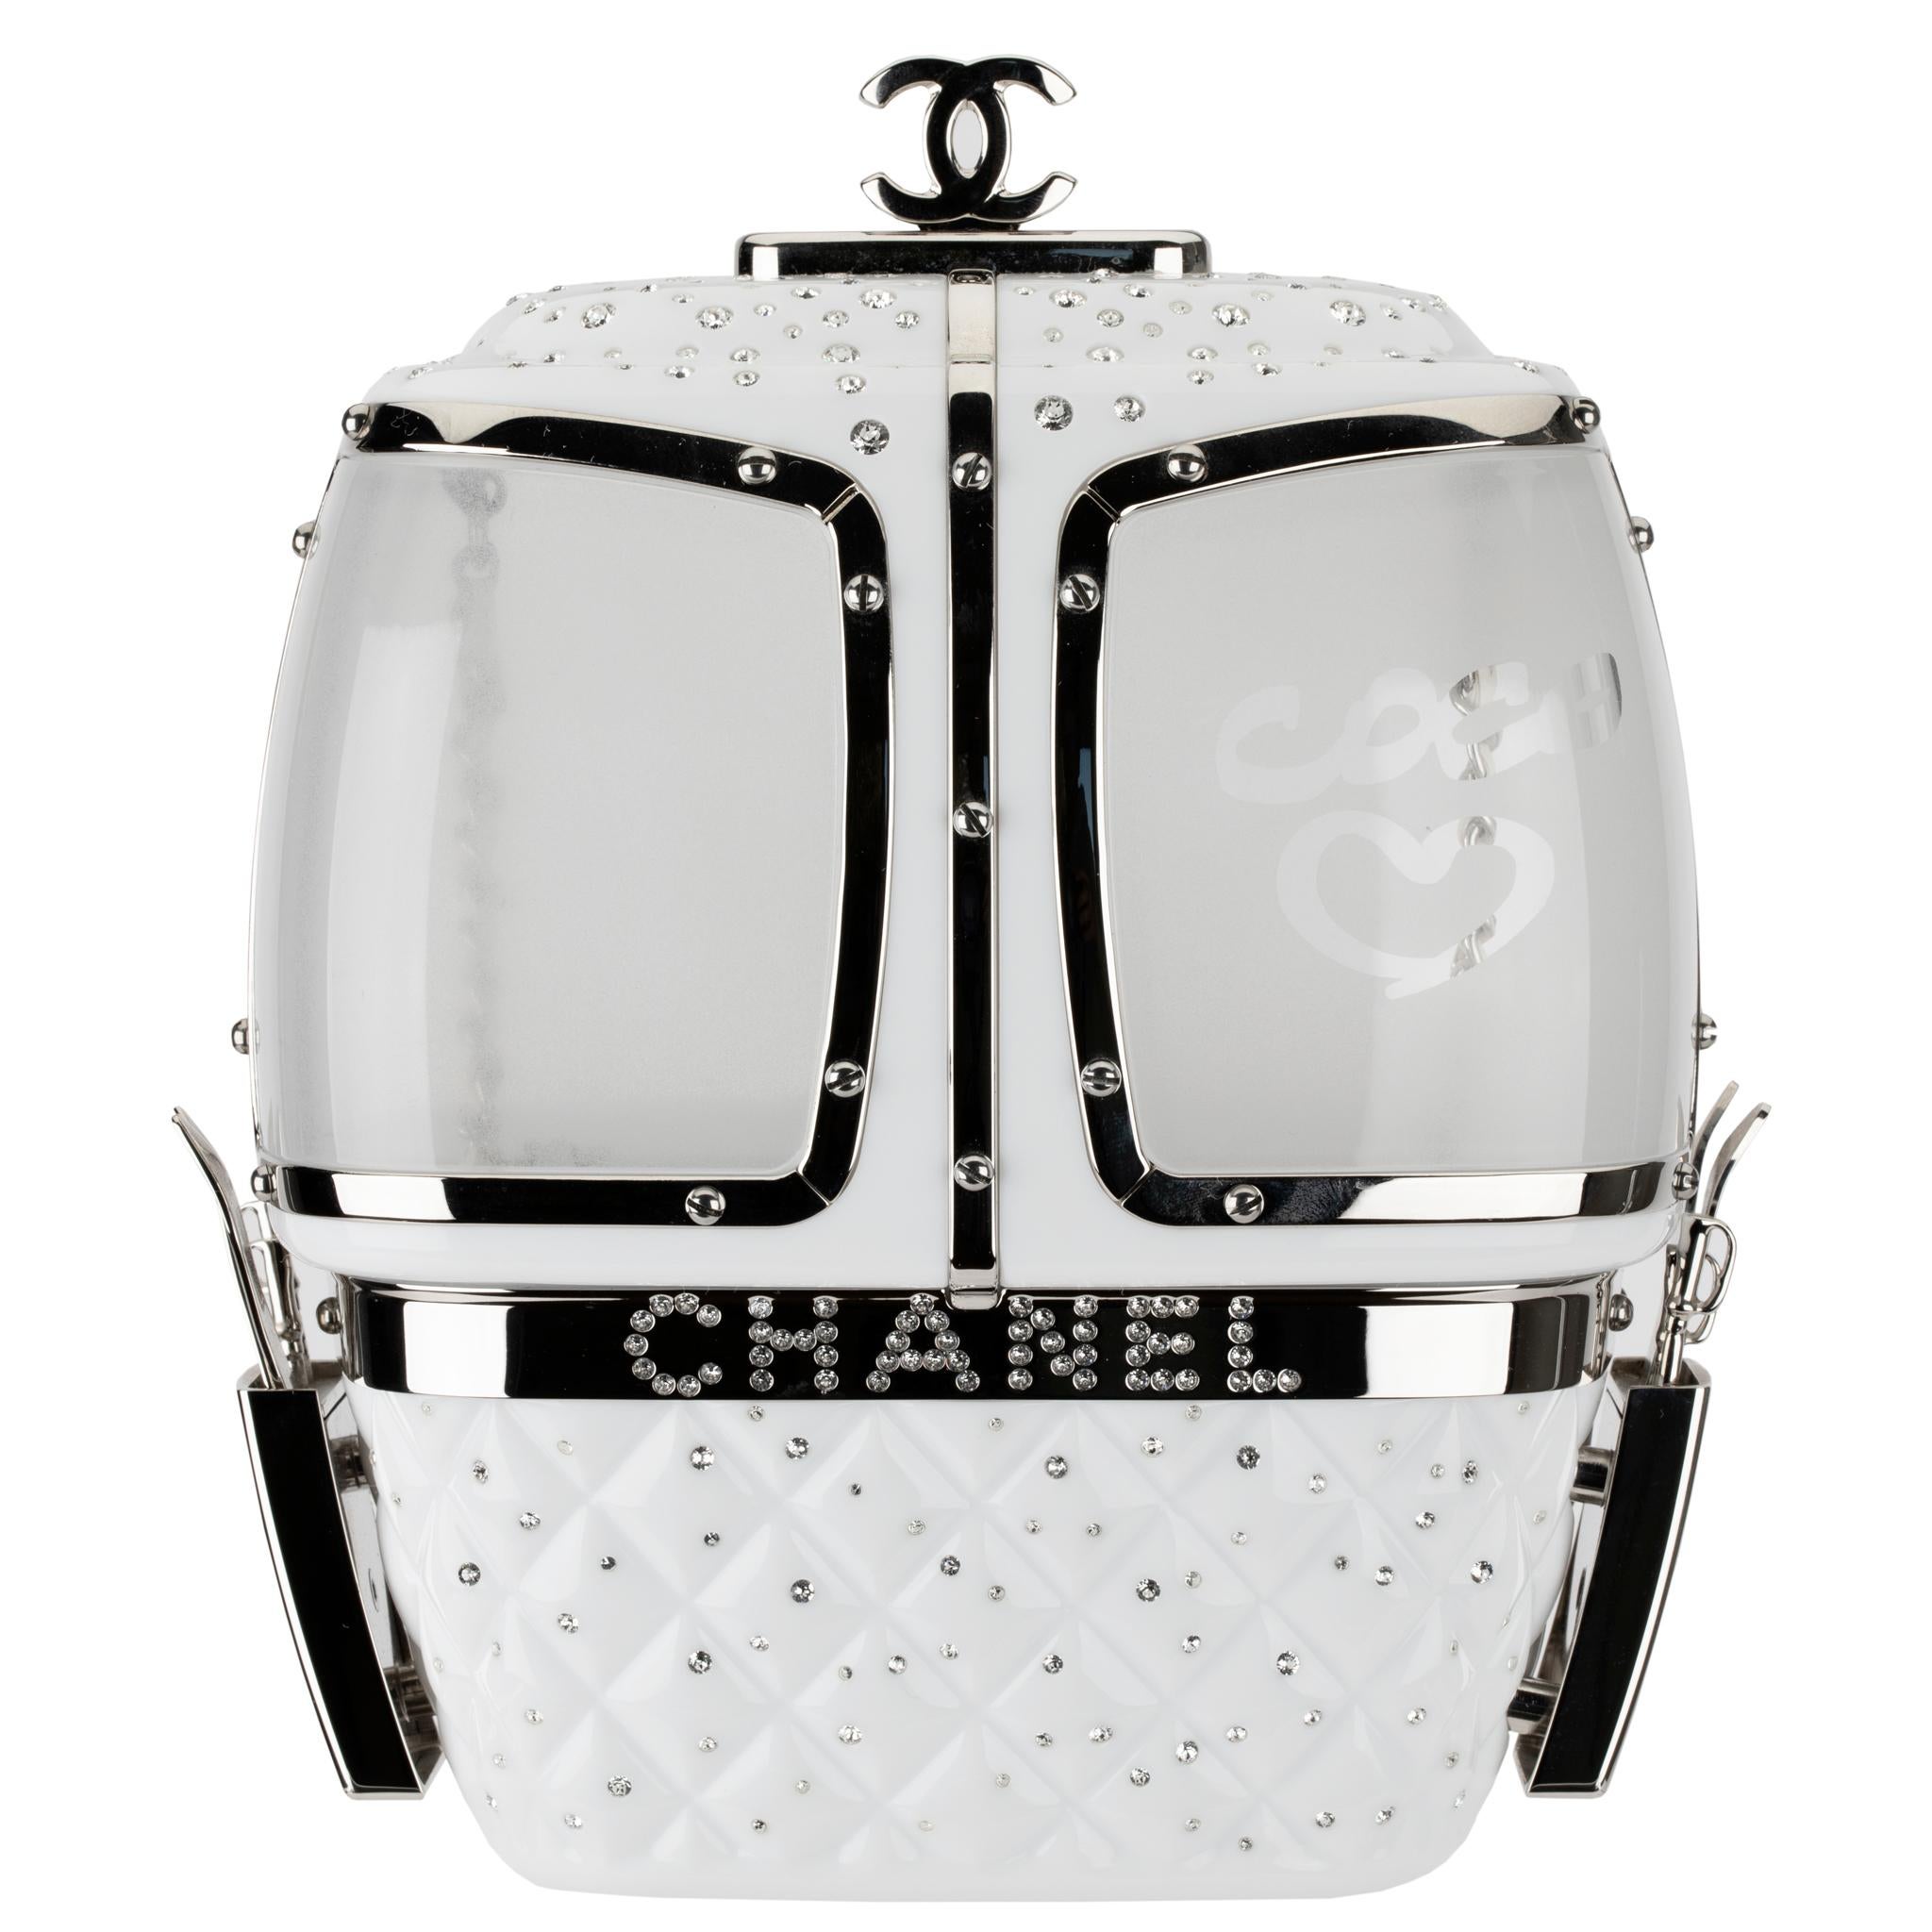 This Ski Gondola Minaudière or, more familiarly known known as a cable cars, from the ski resort themed Fall/Winter 2019 collection is made from snow white lucite, with silver tone hardware and rhinestones decorated throughout. Look closely, and